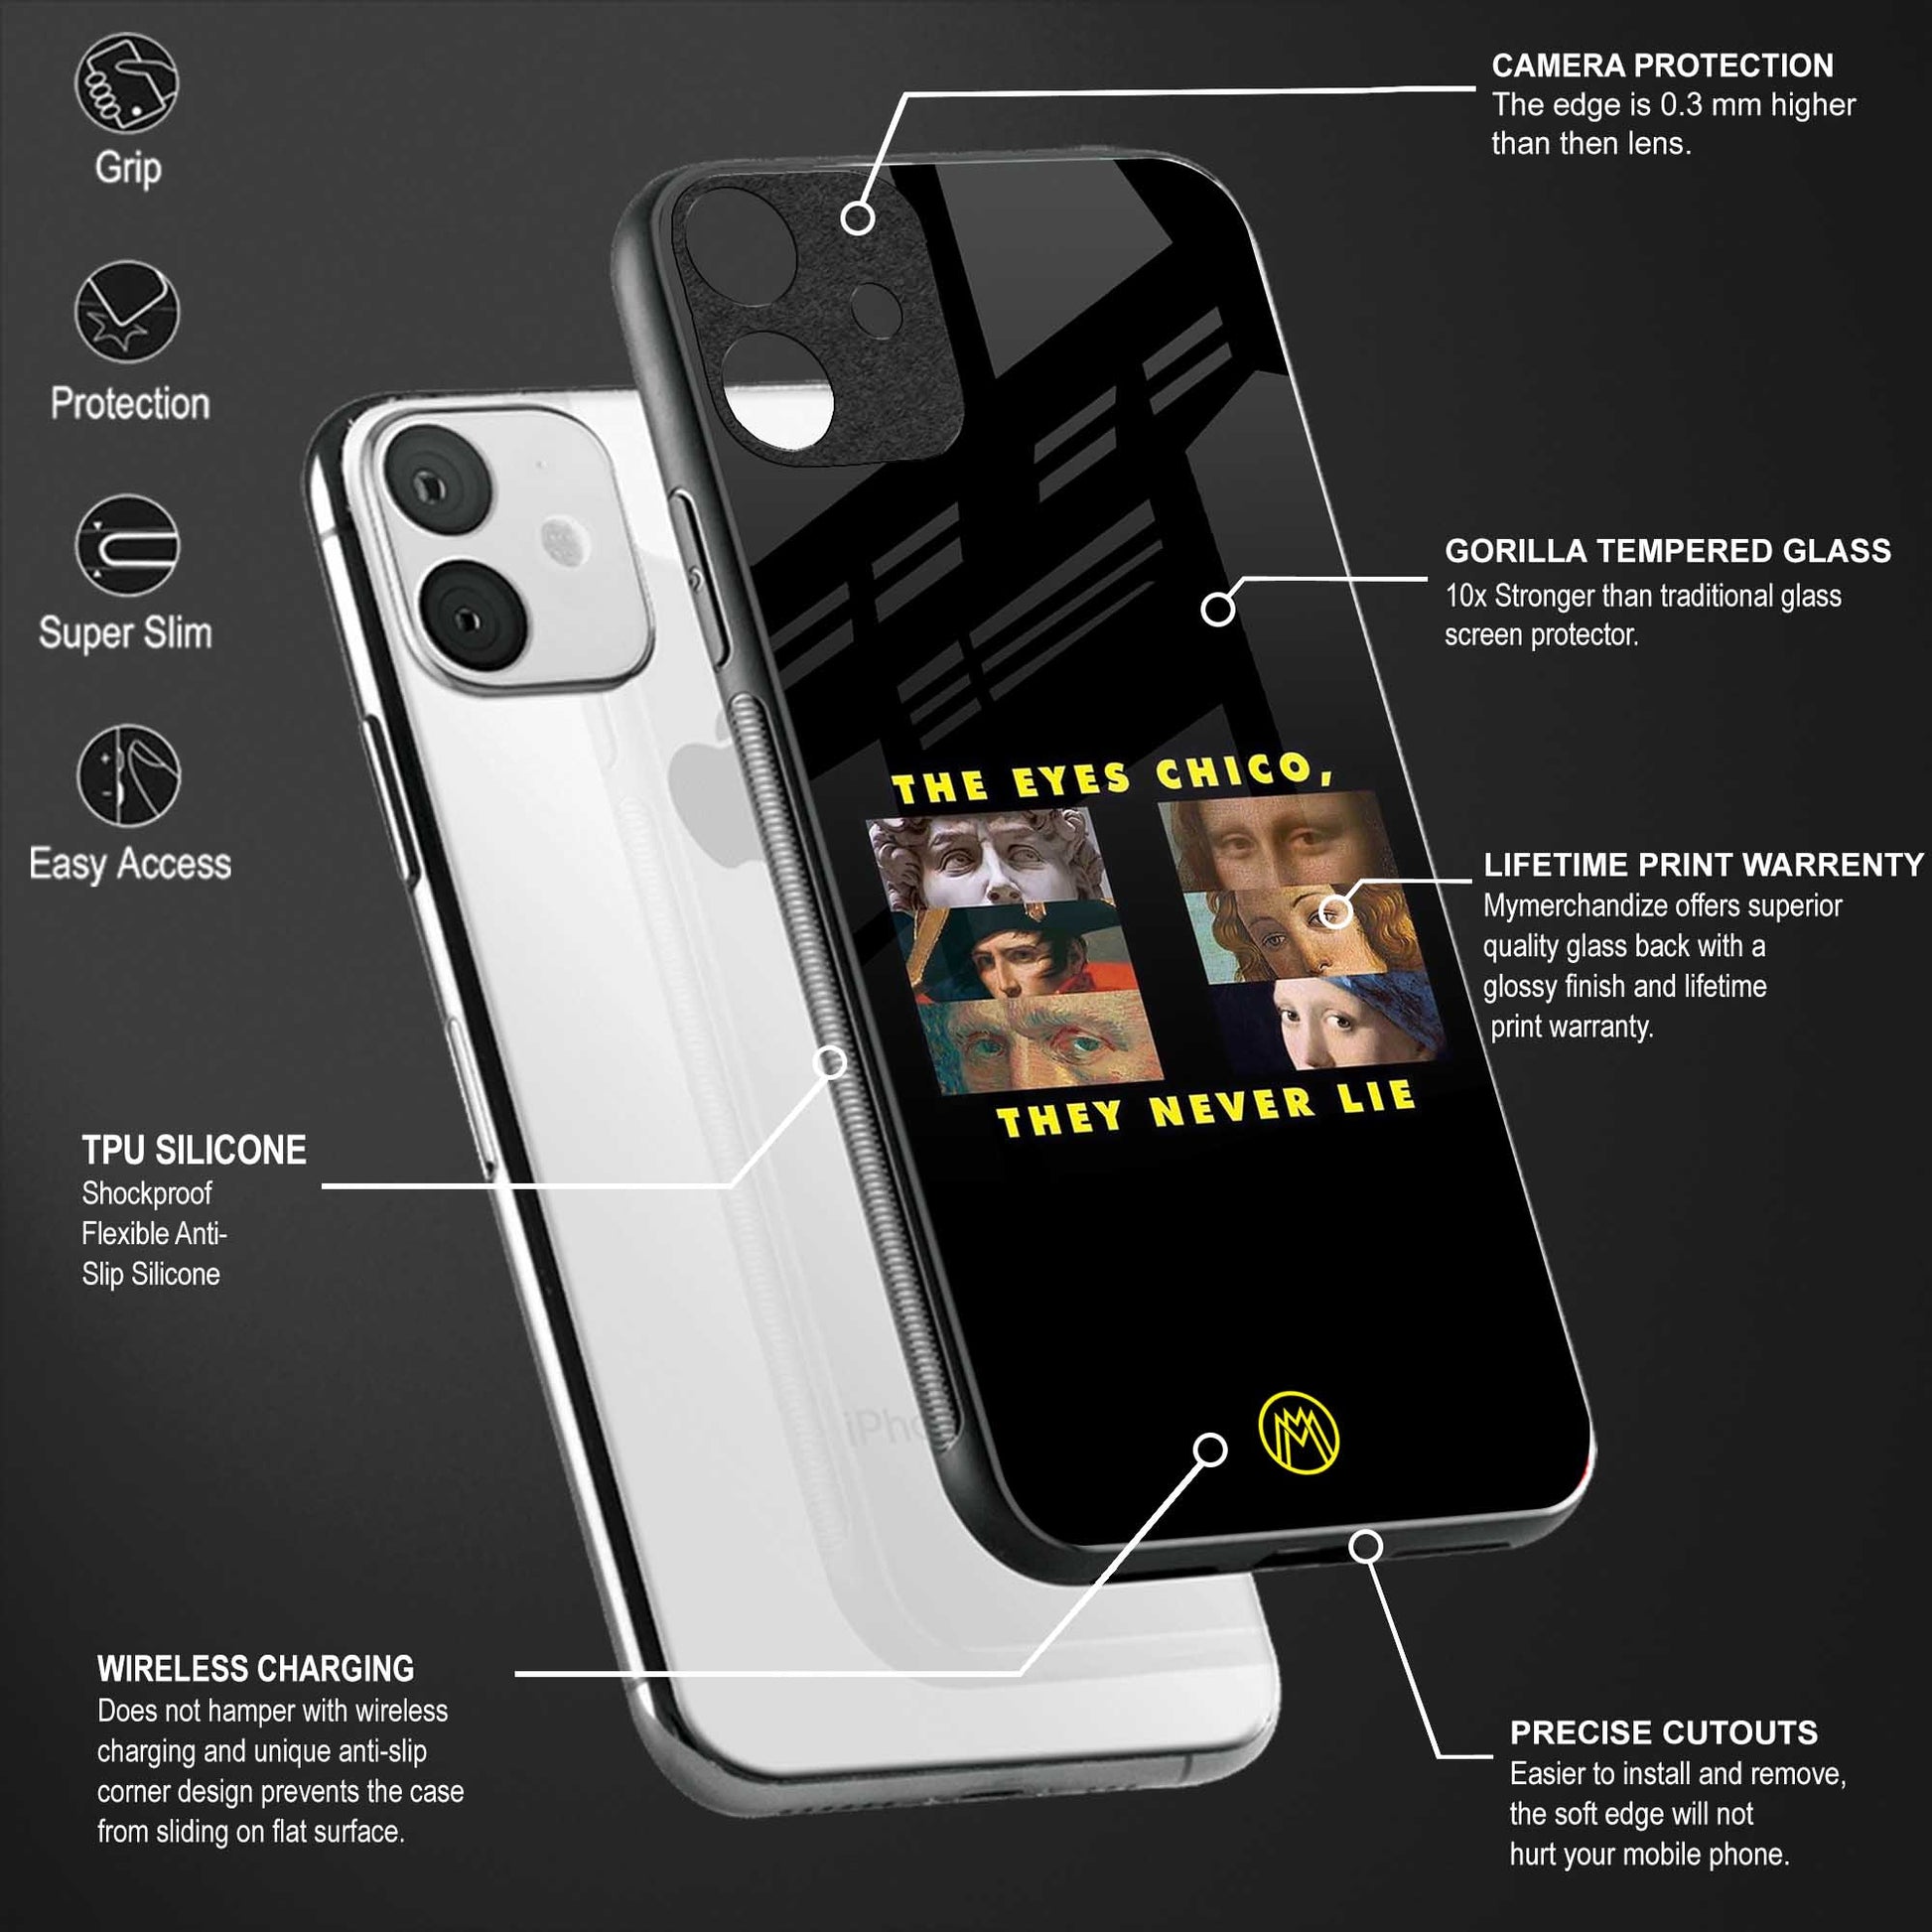 The-Eyes-Chico,-They-Never-Lie-Movie-Quote-Glass-Case for phone case | glass case for samsung galaxy s23